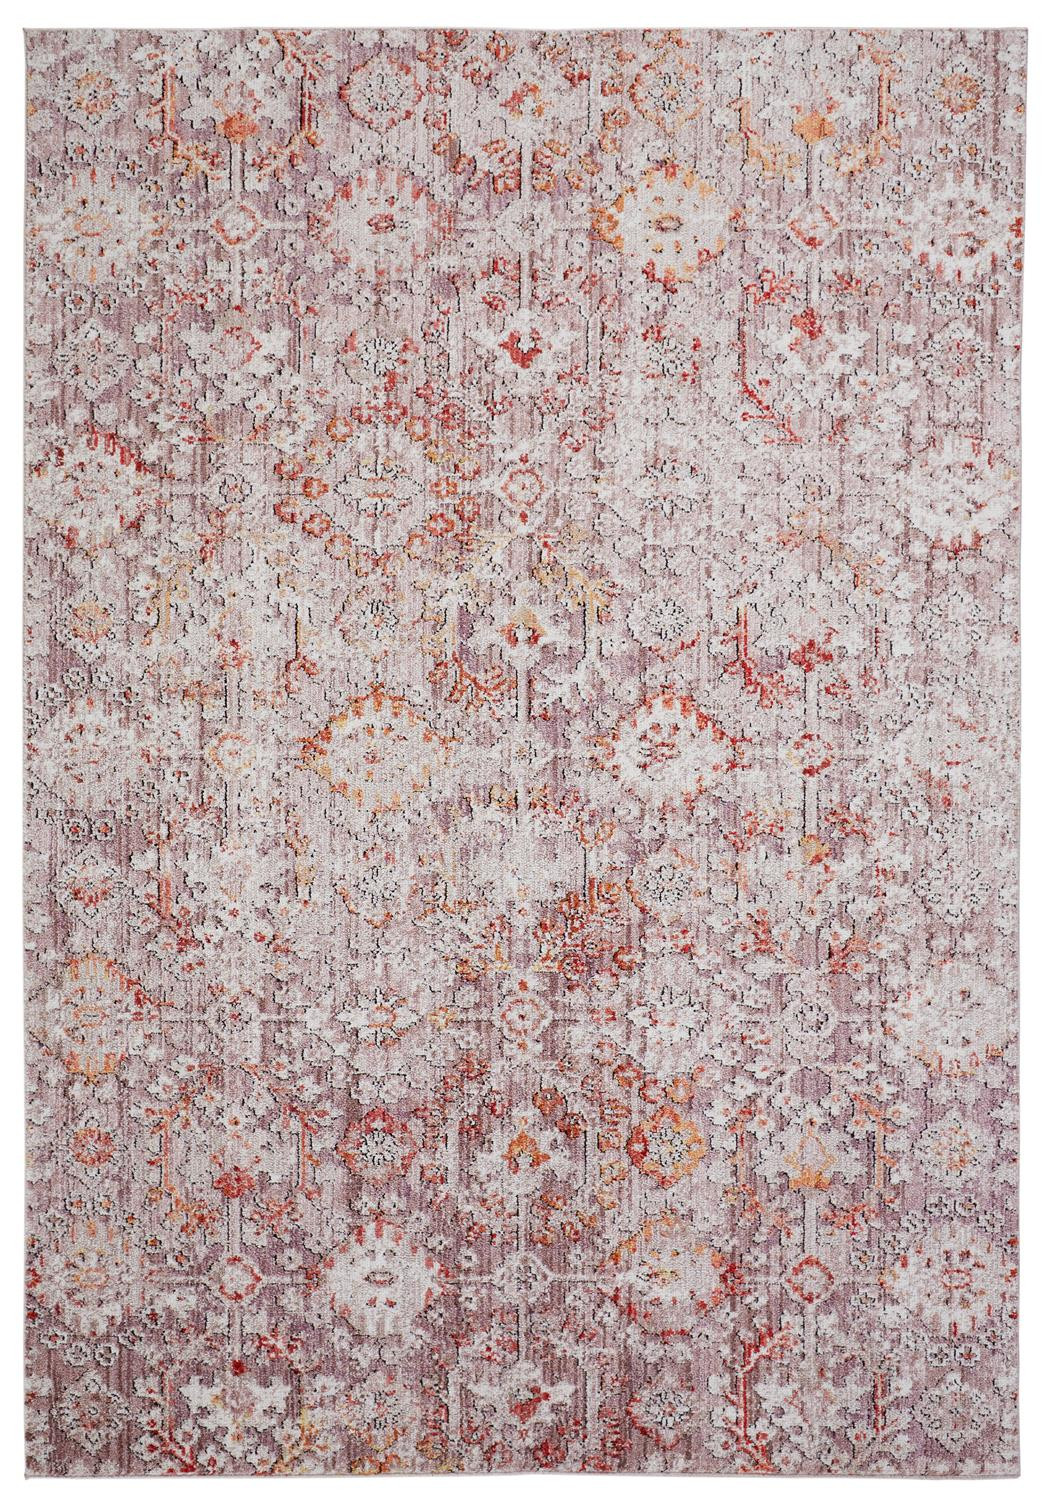 7' X 10' Pink Ivory And Gray Abstract Stain Resistant Area Rug-512351-1